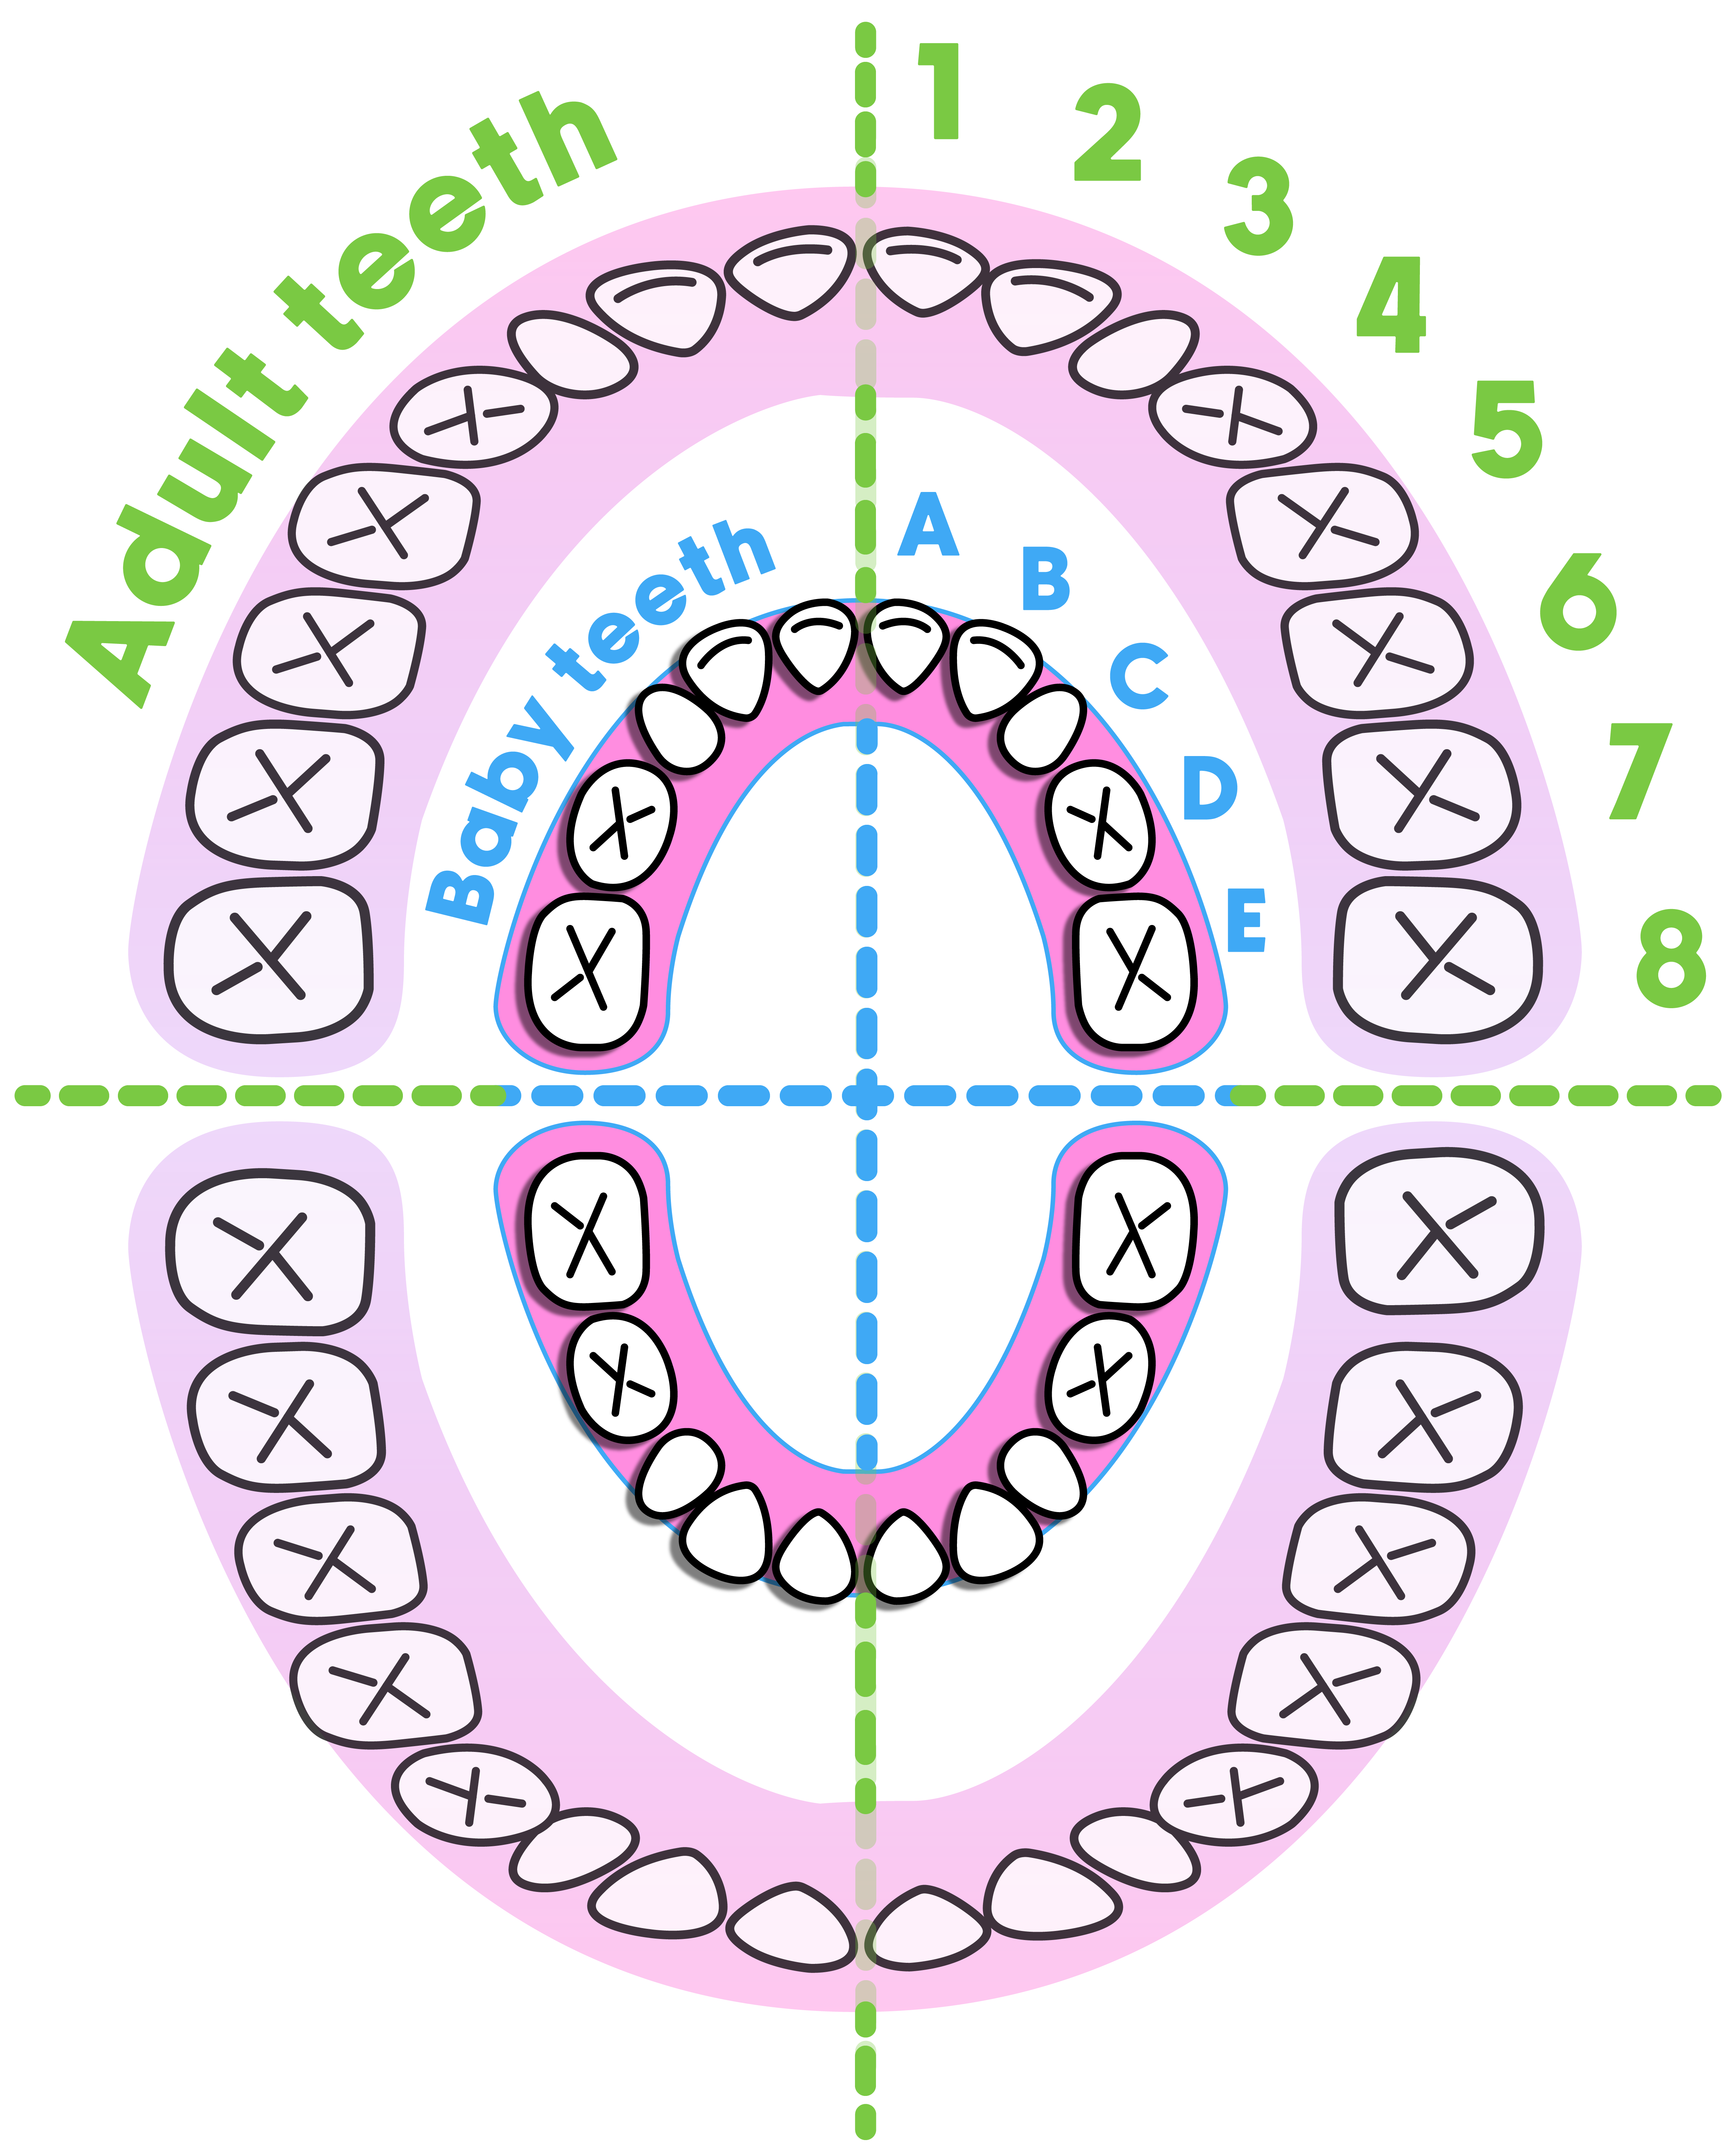 Illustration of a teeth chart showing where baby teeth come into the mouth with adult teeth on the outside ring to show where they irrupt